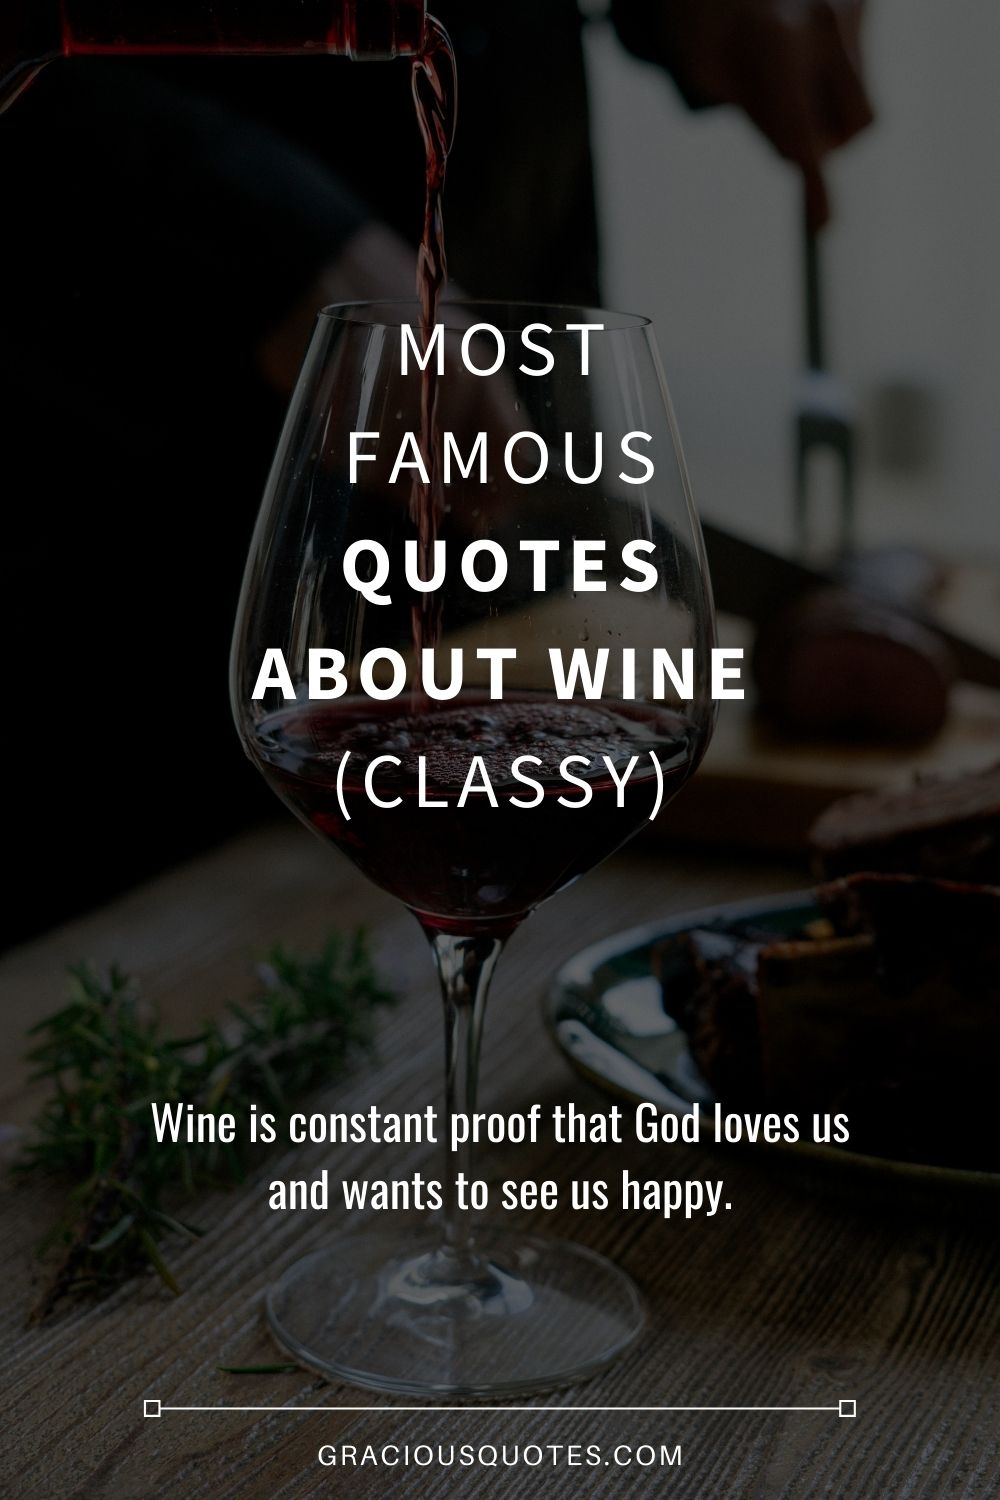 Most Famous Quotes About Wine (CLASSY) - Gracious Quotes